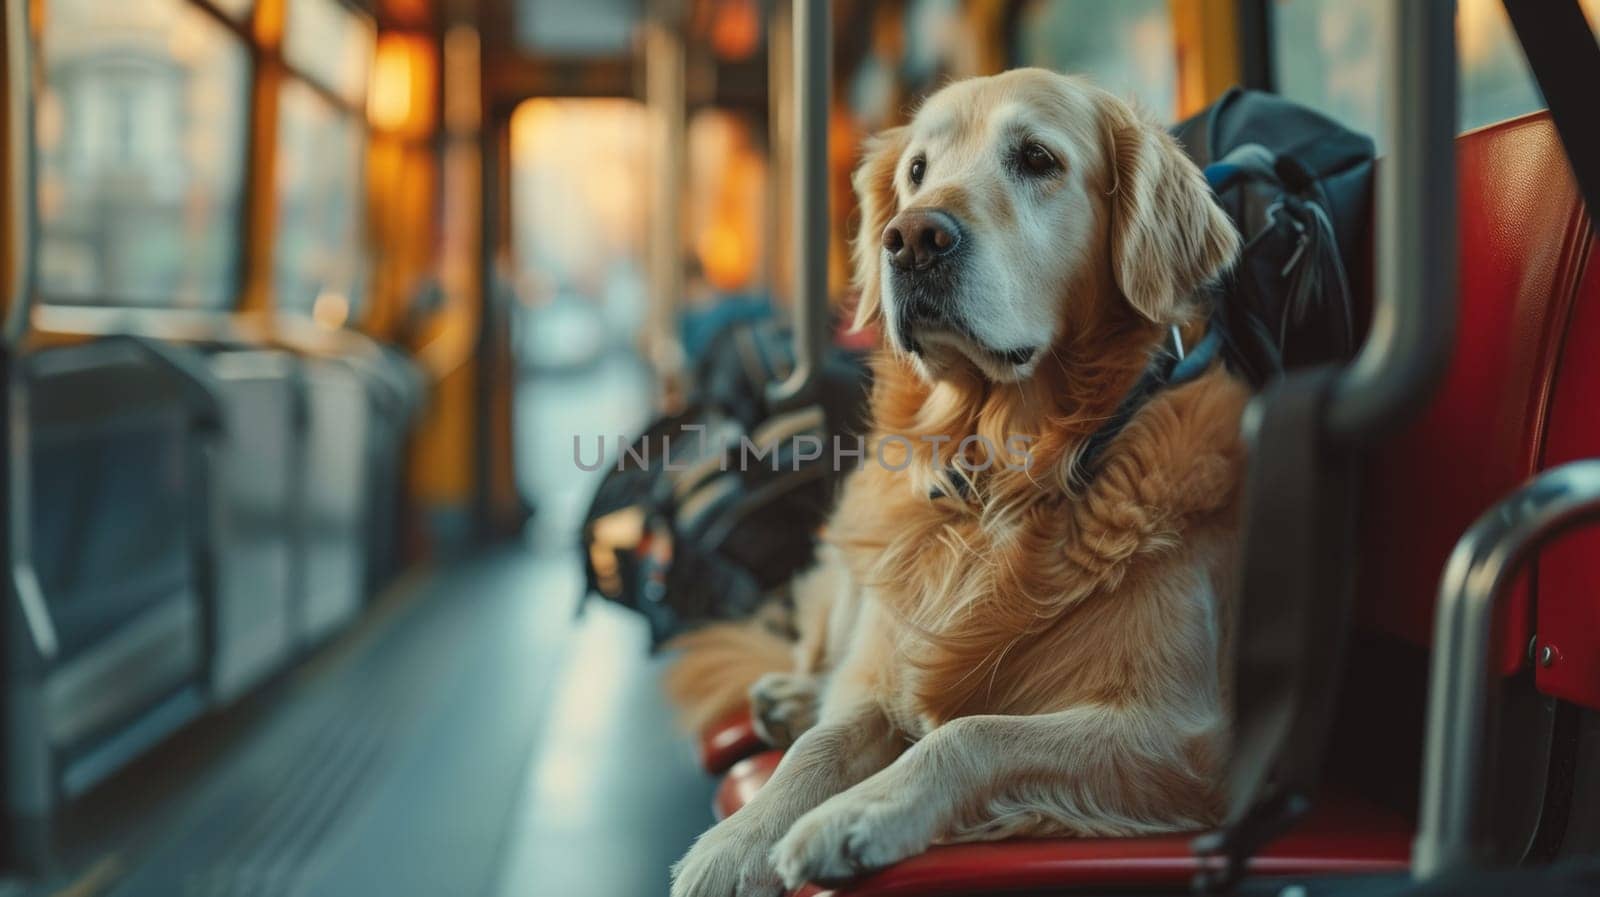 A dog sitting on a bus seat with its head hanging down, AI by starush